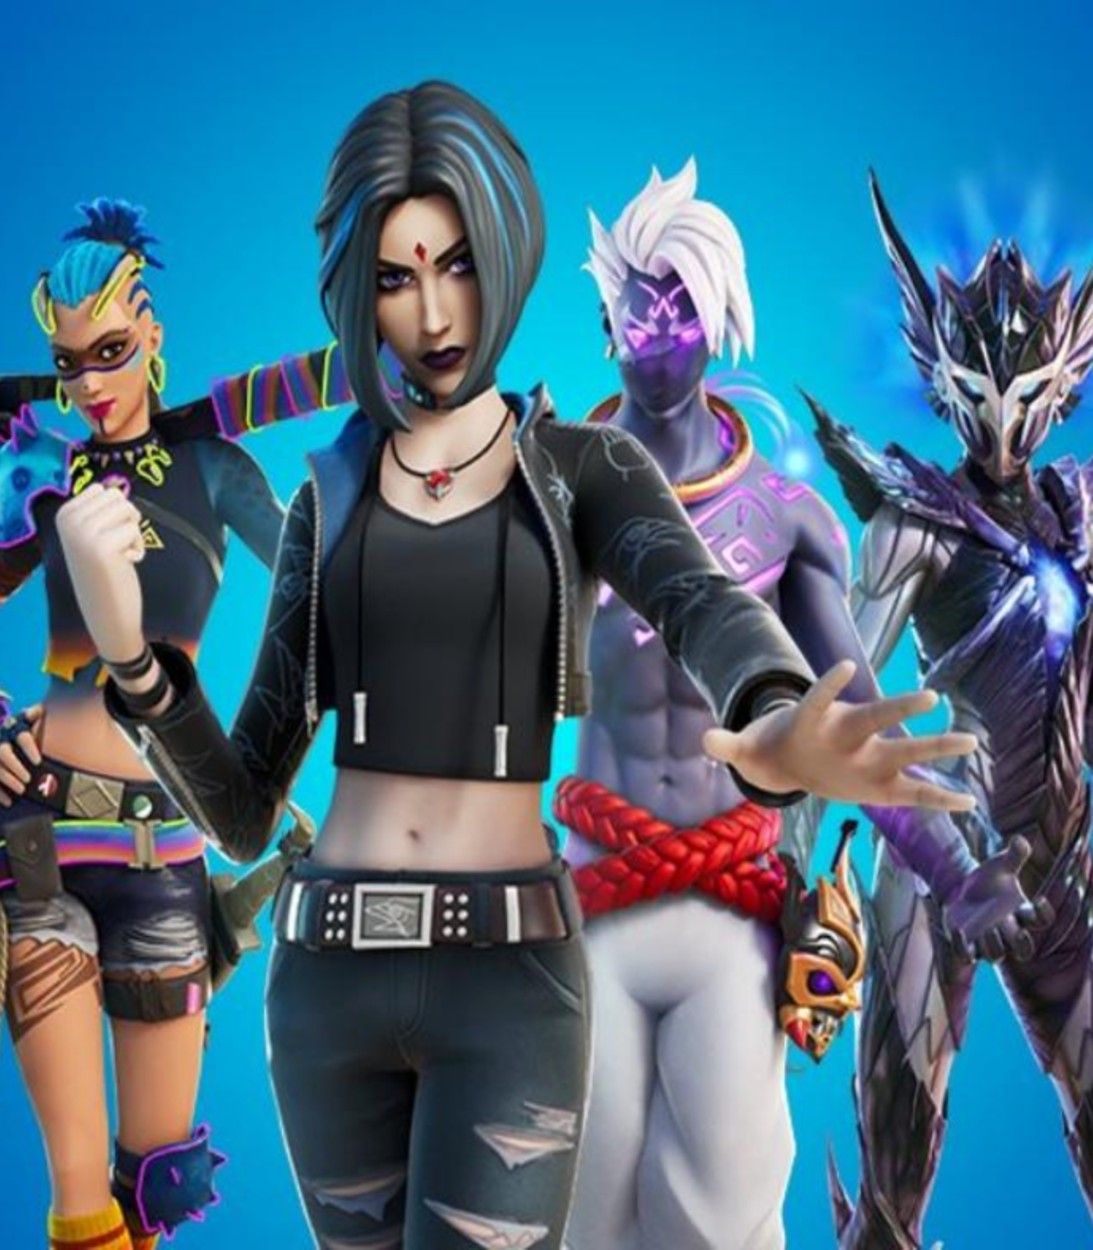 Rebirth Raven and some of the other Season 6 Battle Pass skins in Fortnite